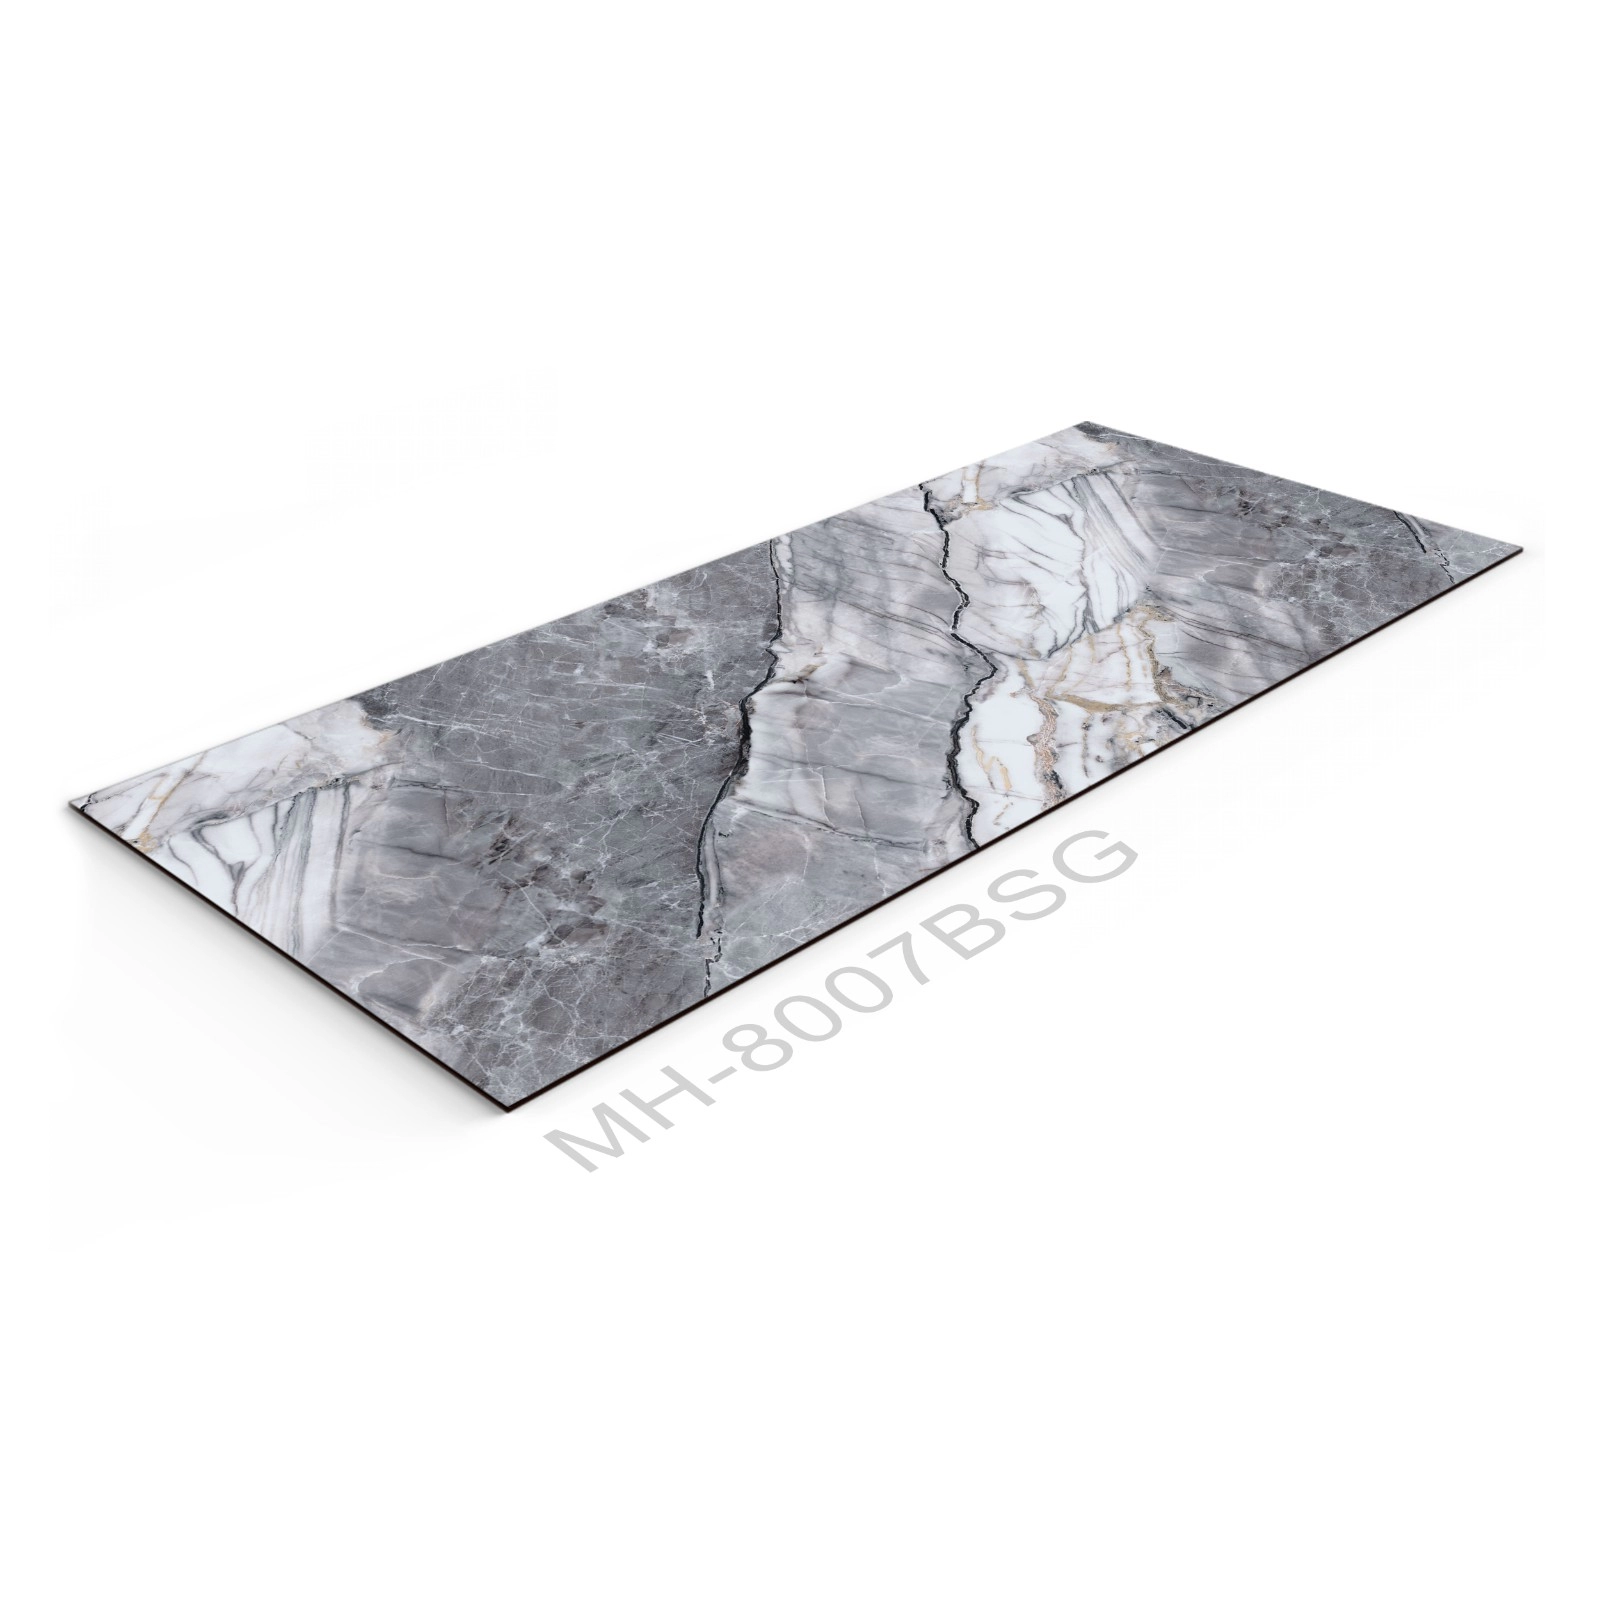 9mm thickness Continous Stone pattern Solid panel faux Marble series wall decoration materials